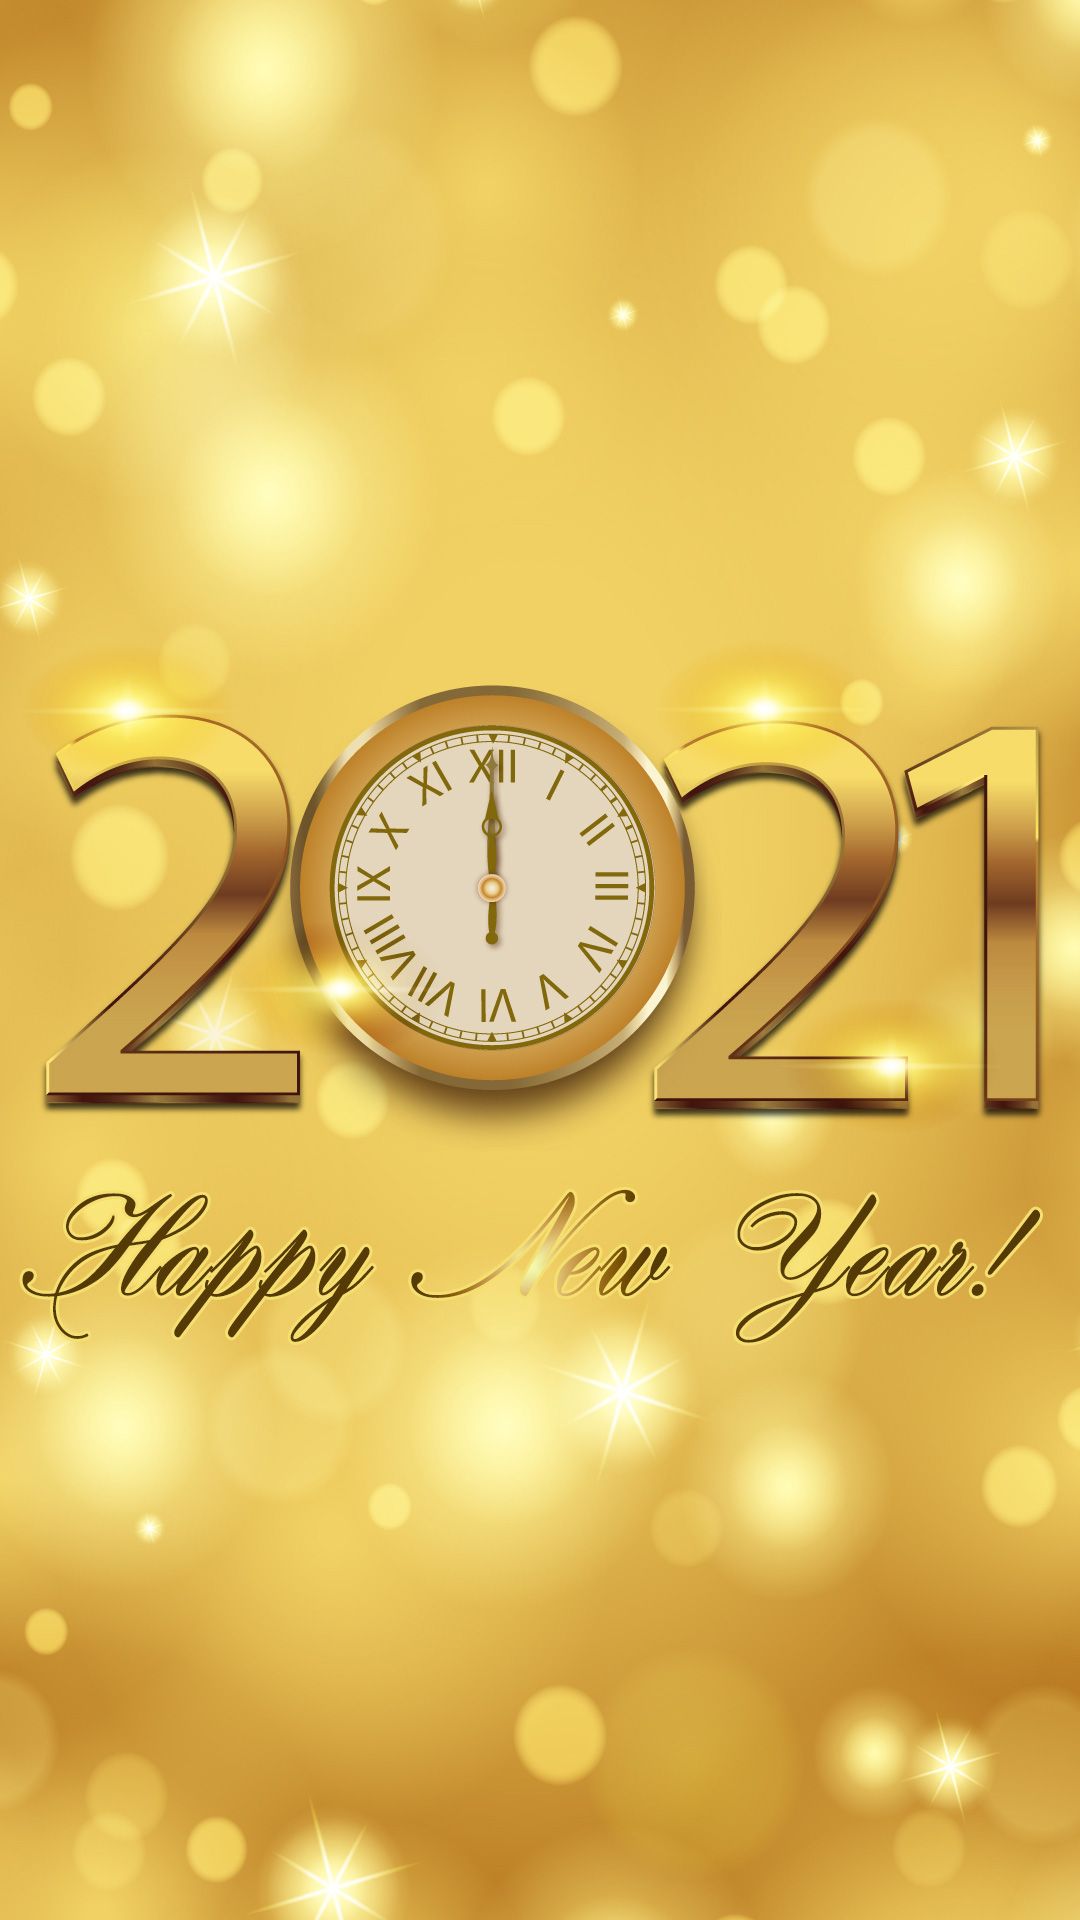 Happy New Year 2021 Golden Backgrounds